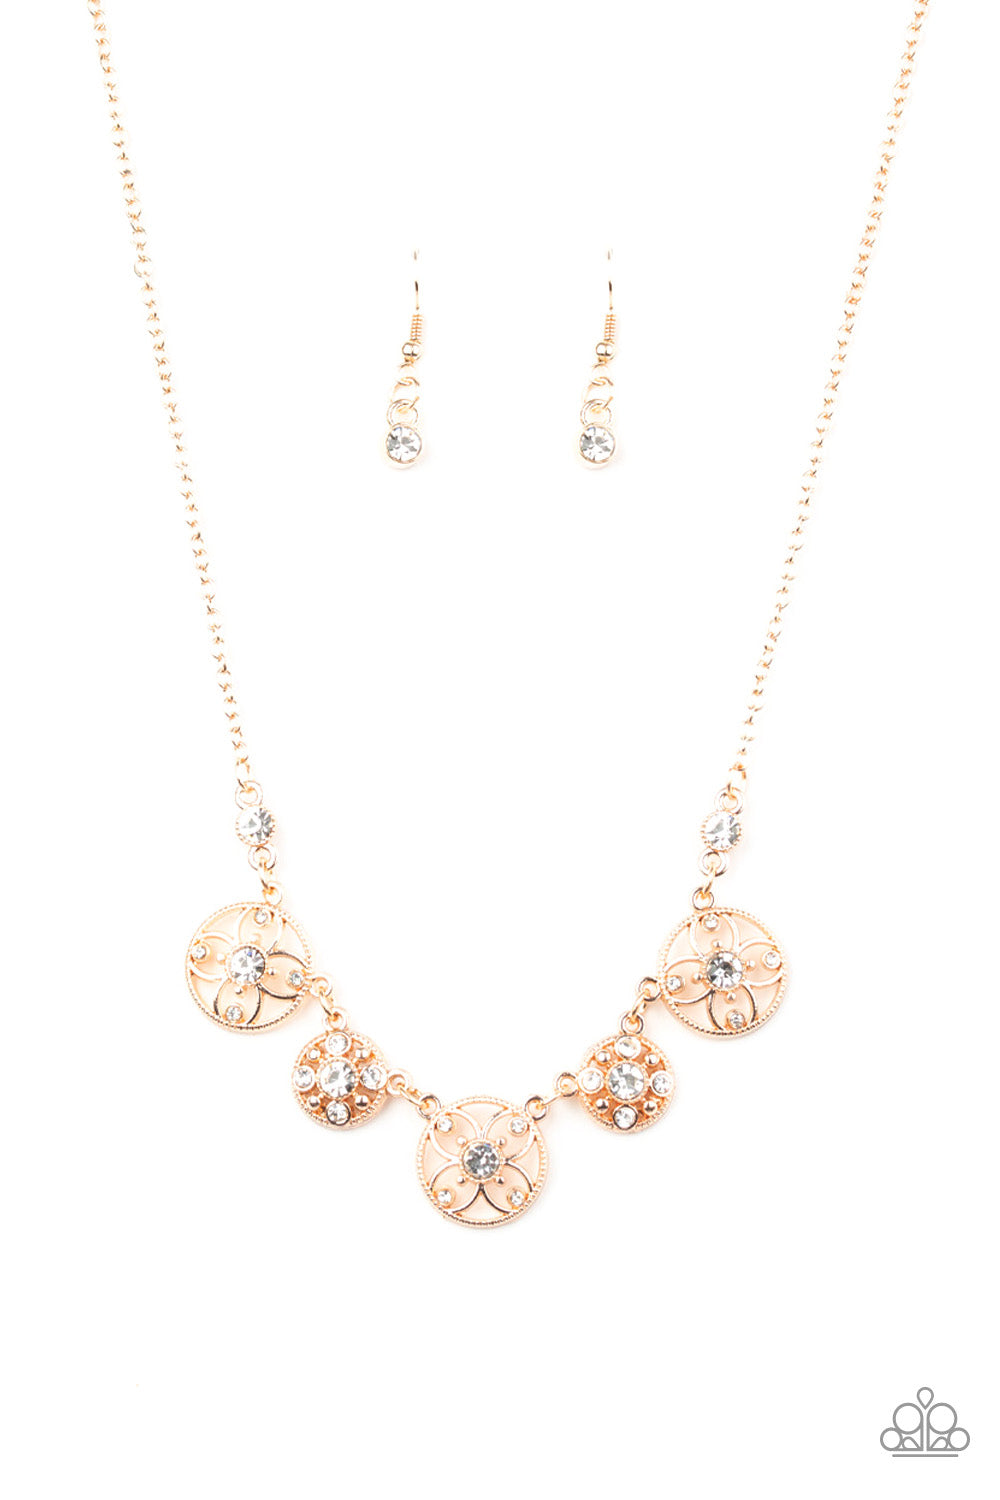 Floral Florence Rose gold - VJ Bedazzled Jewelry